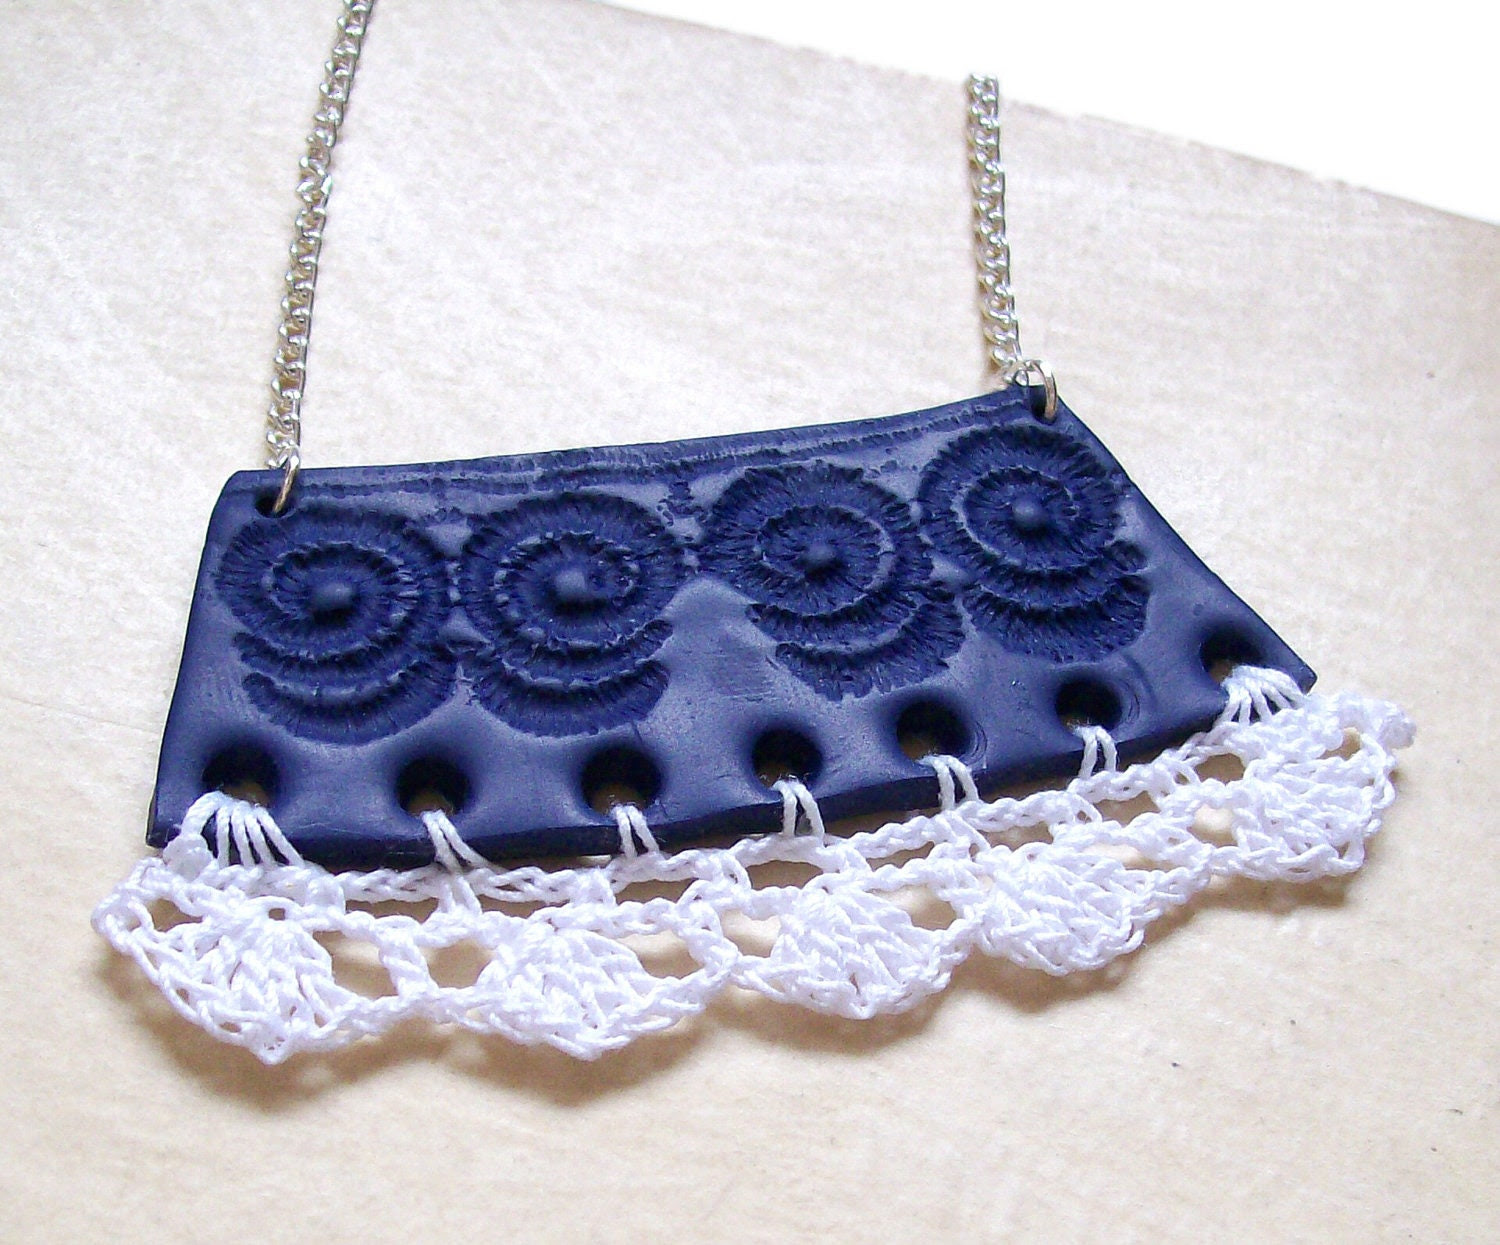 Crochet clay bib necklace navy blue white fashion necklace nautical lace crochet frill polymer clay necklace "The Collar Blue" one-of-a-kind - HunkiiDorii